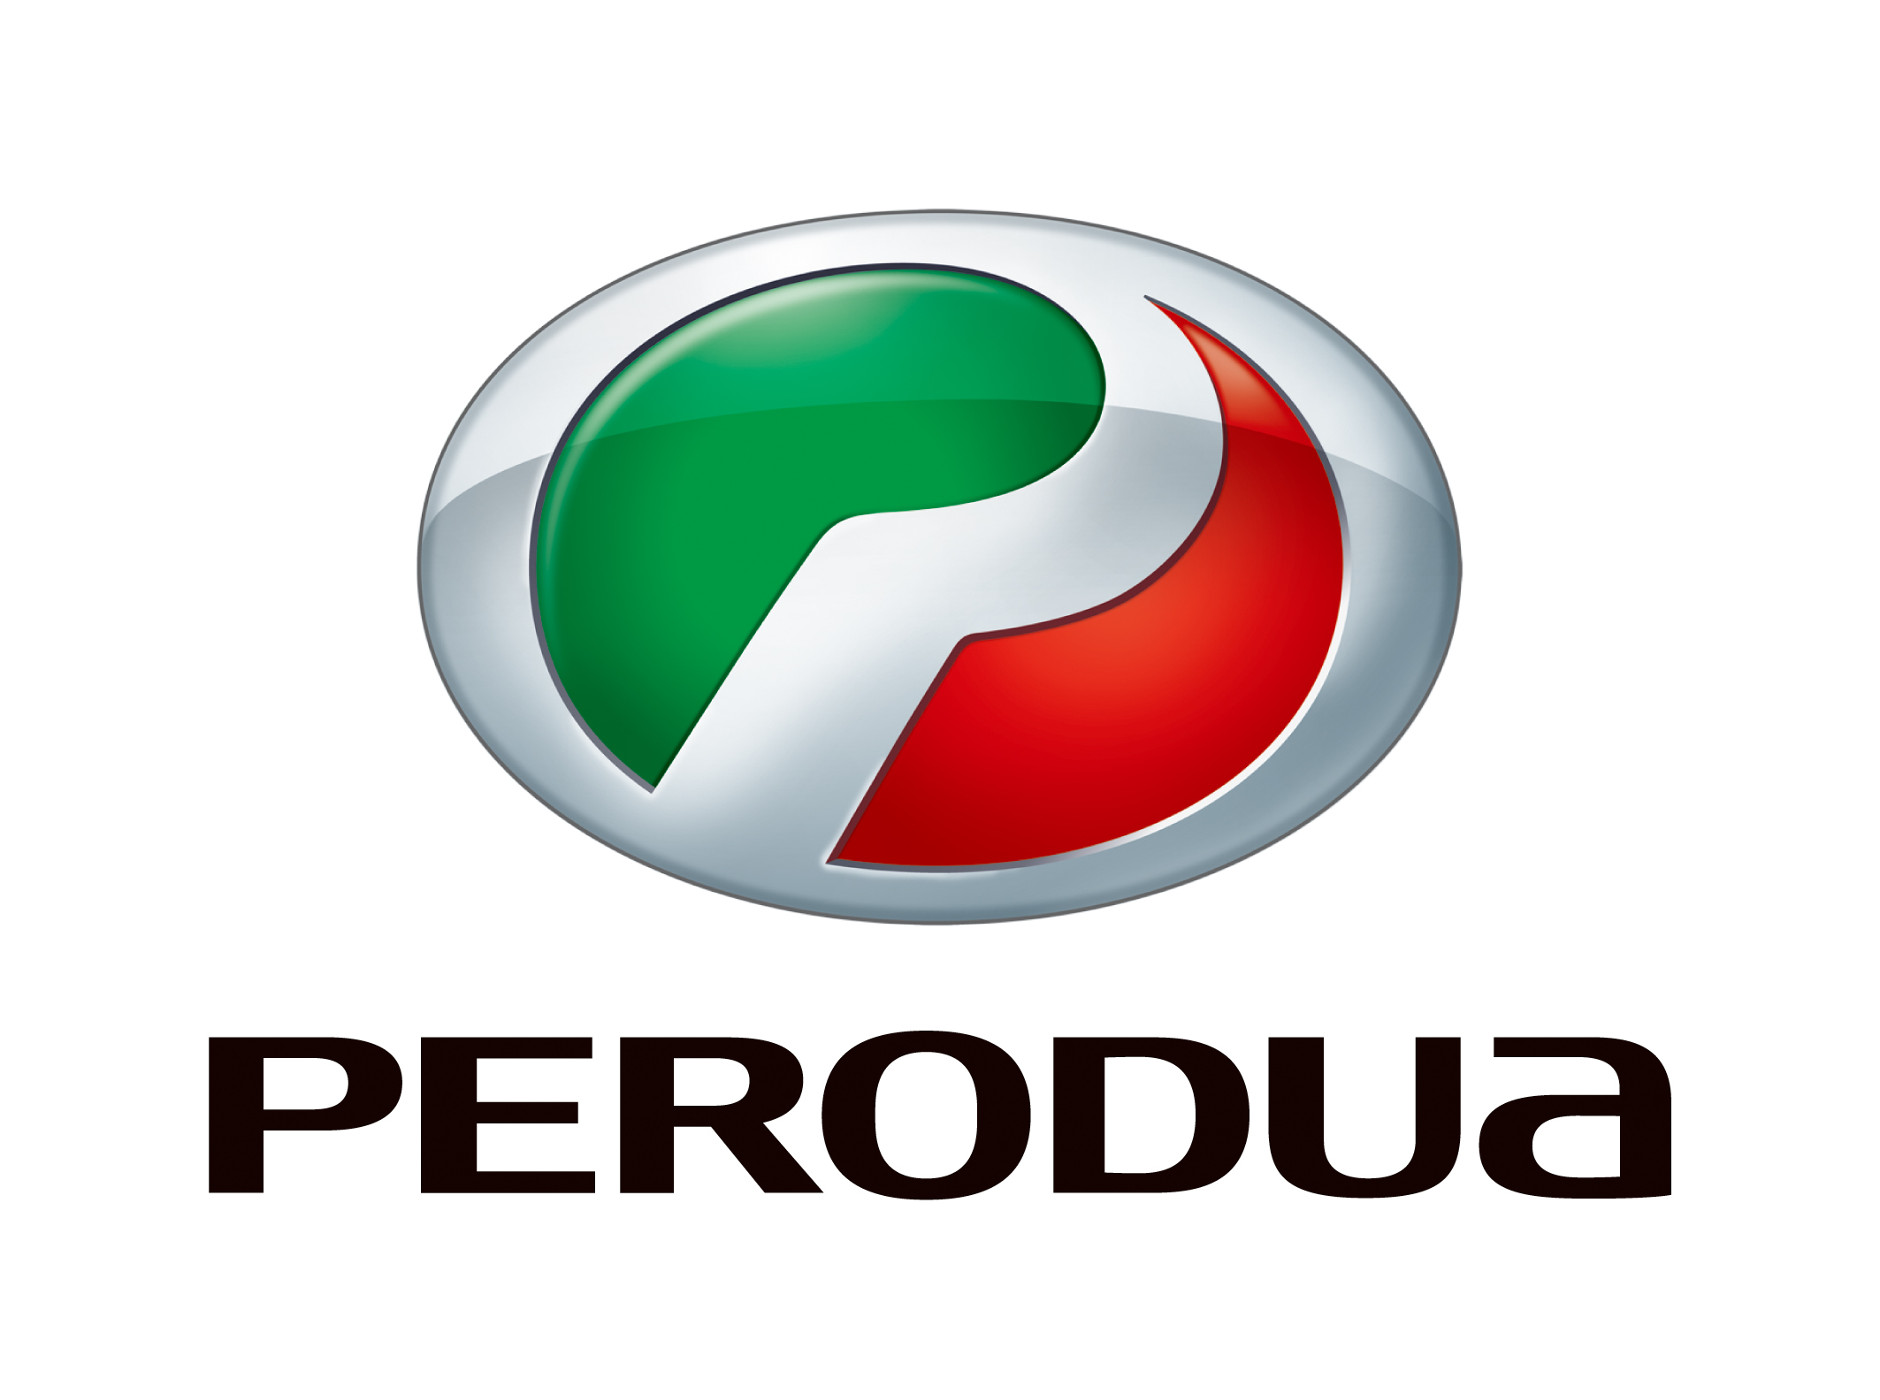 (UPDATE) #Perodua: Could This Be An Image Of The New 